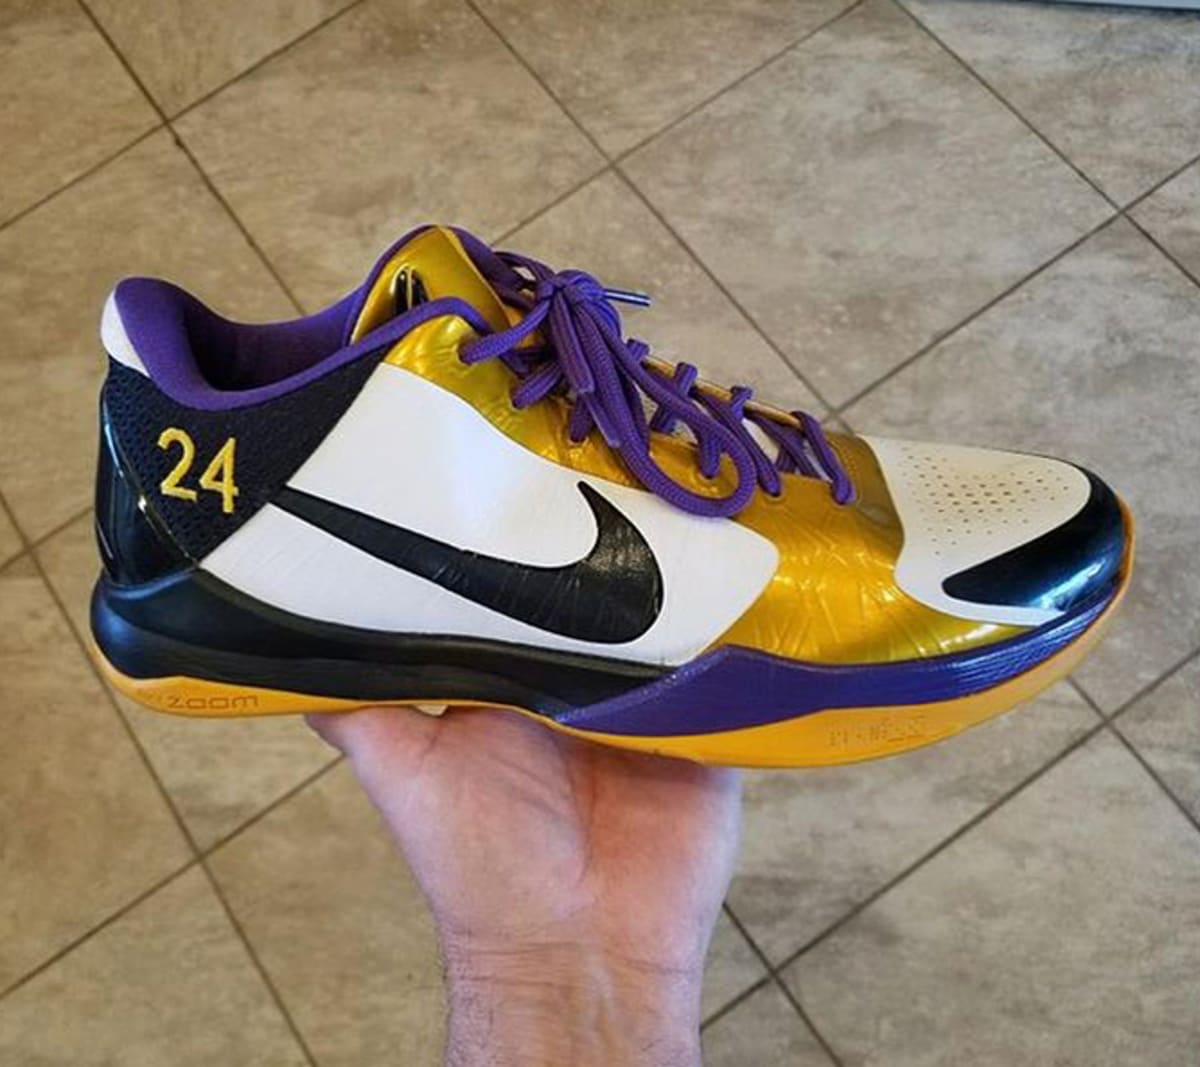 NIKEiD Kobe 5 Lakers - Nike By You iD Kobe 5 Designs | Sole Collector